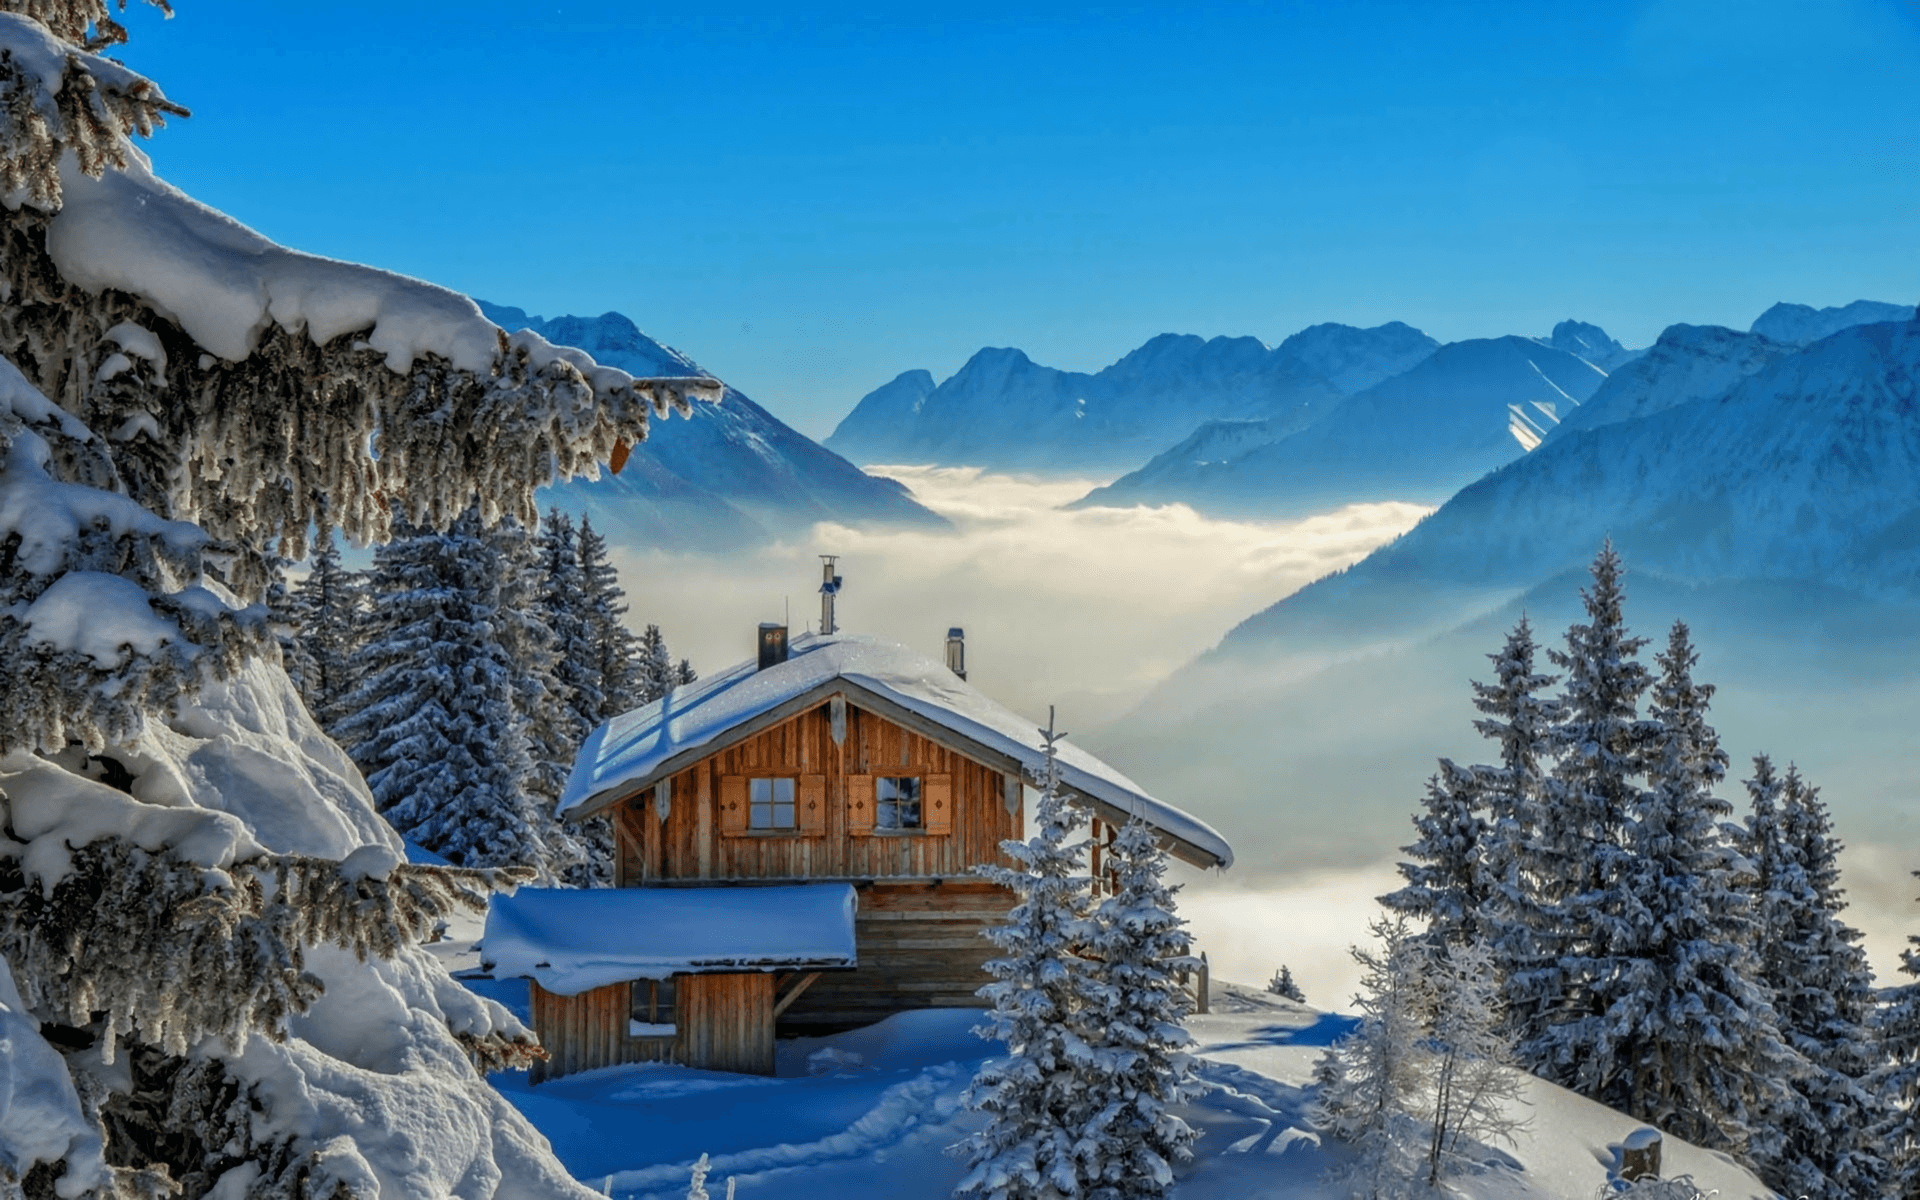 Cabin in the Winter Mountains HD Wallpaper. Background